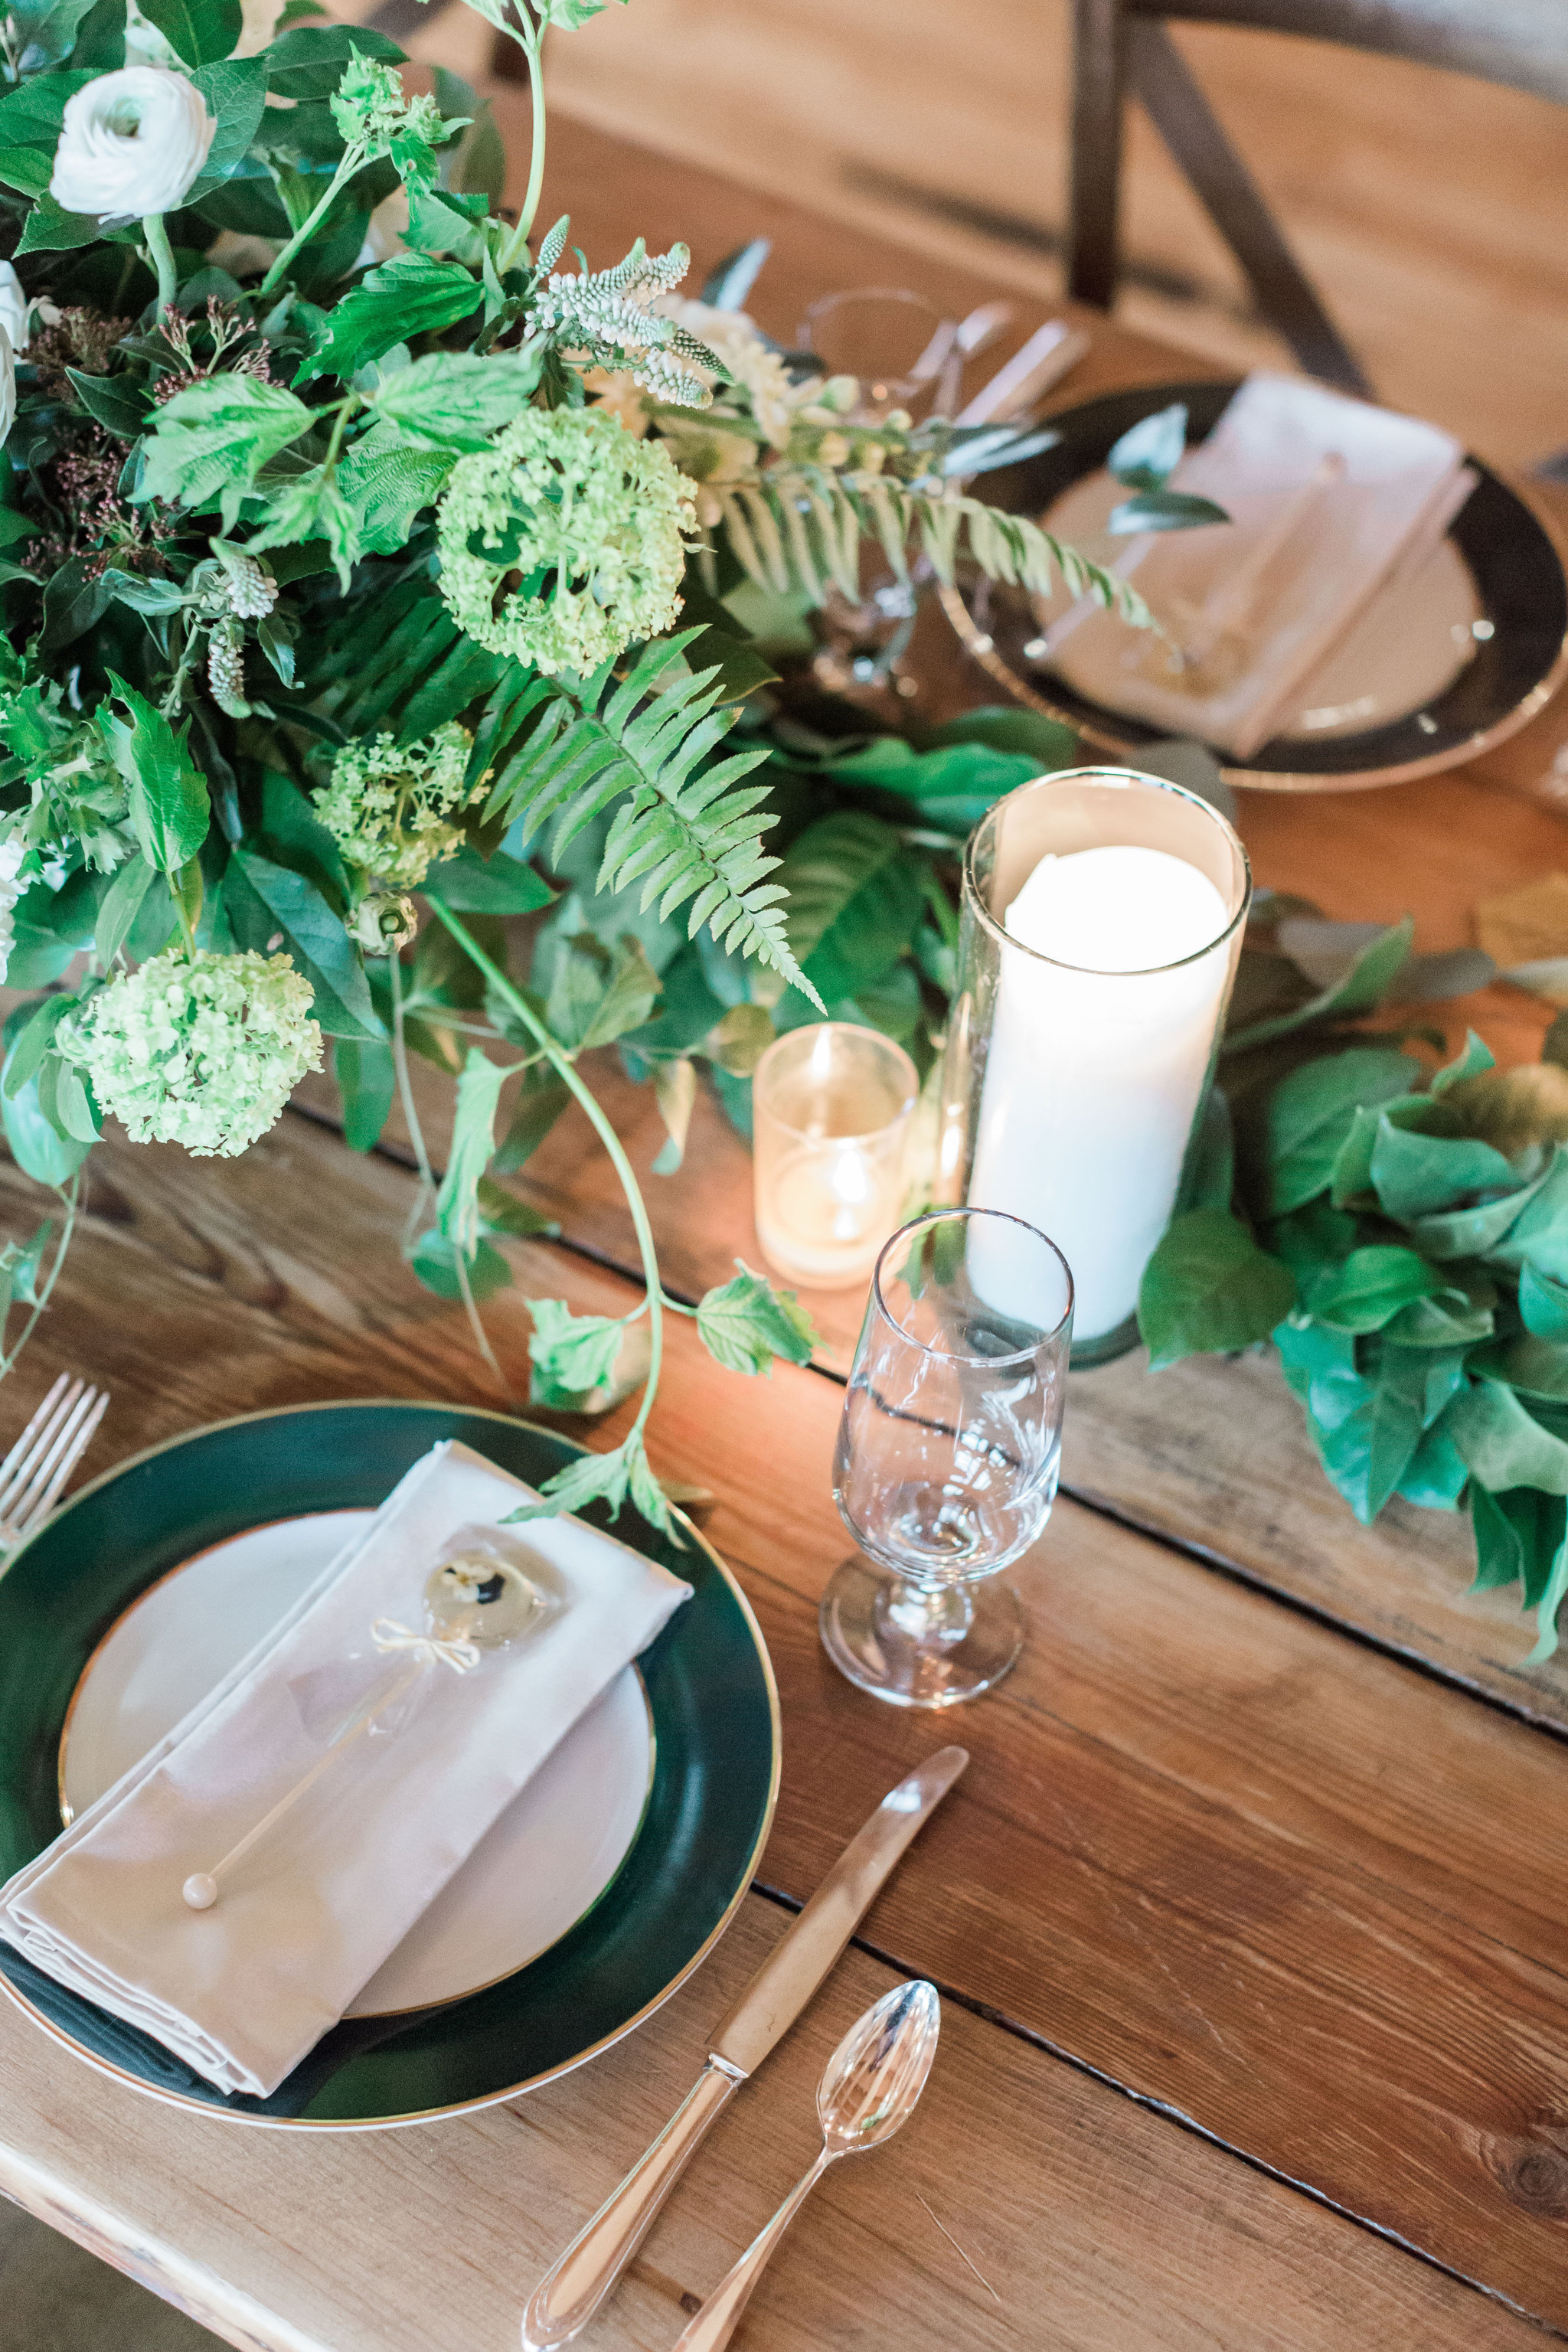 Farm table decorated in green and white for a winter wedding.